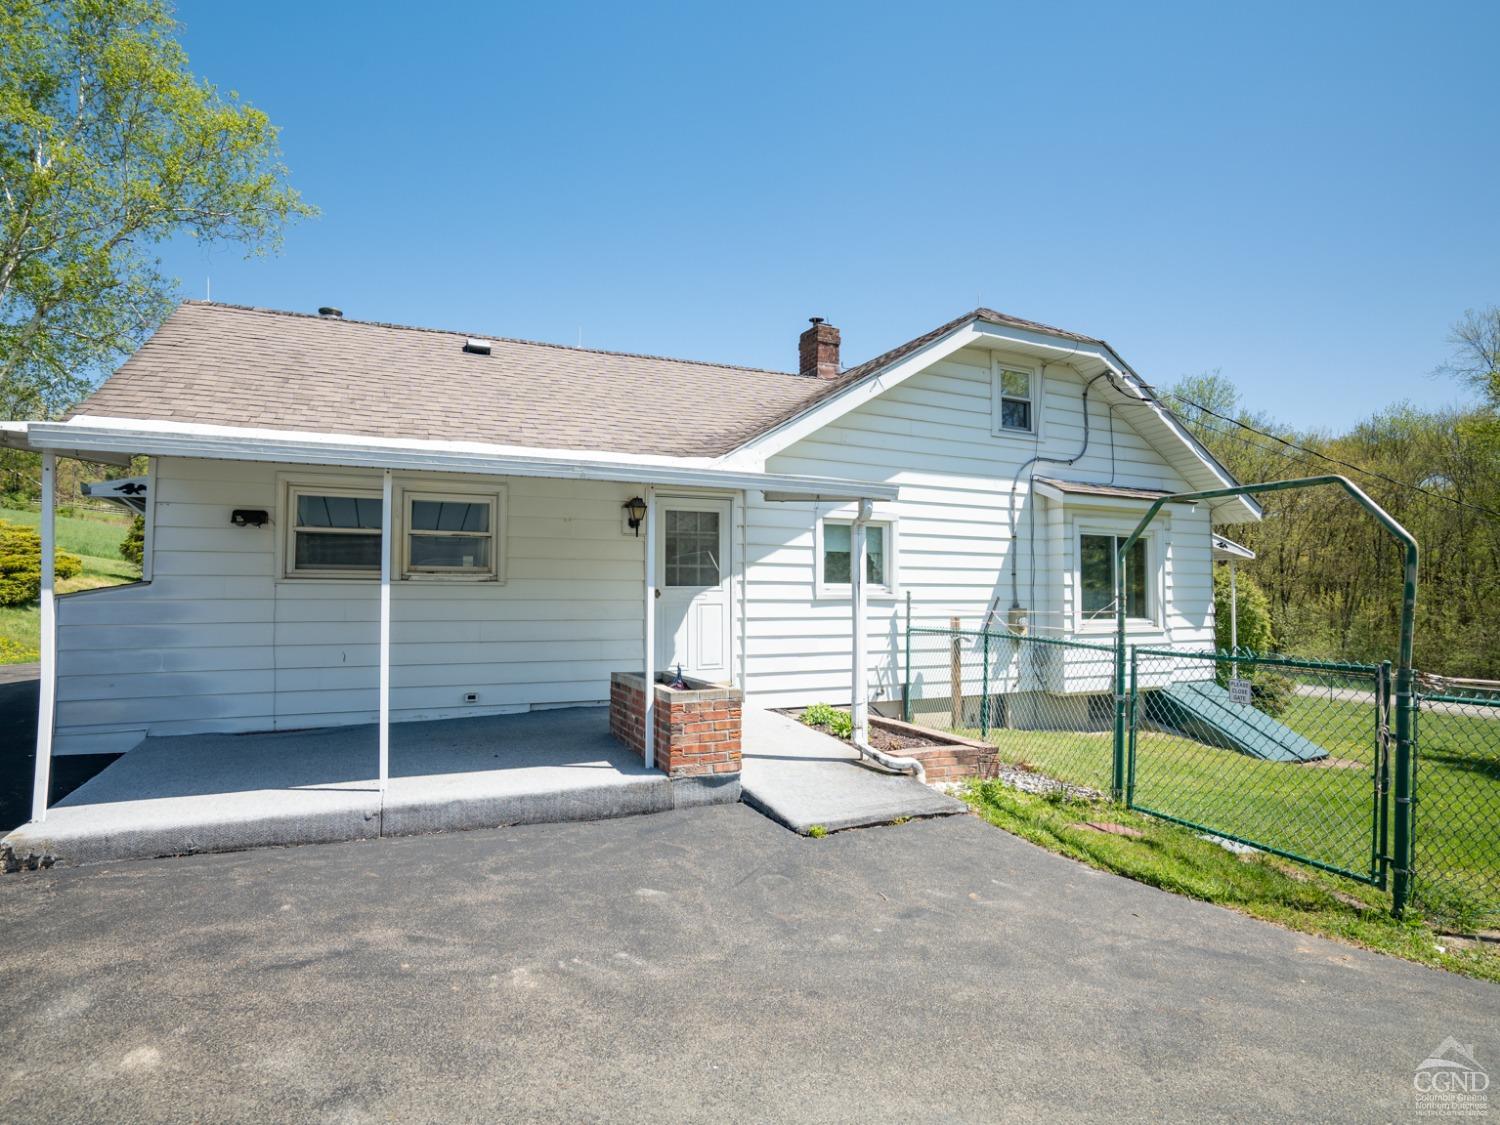 93 White Bridge Rd Rd, Old Chatham, New York - 3 Bedrooms  
2 Bathrooms  
7 Rooms - 